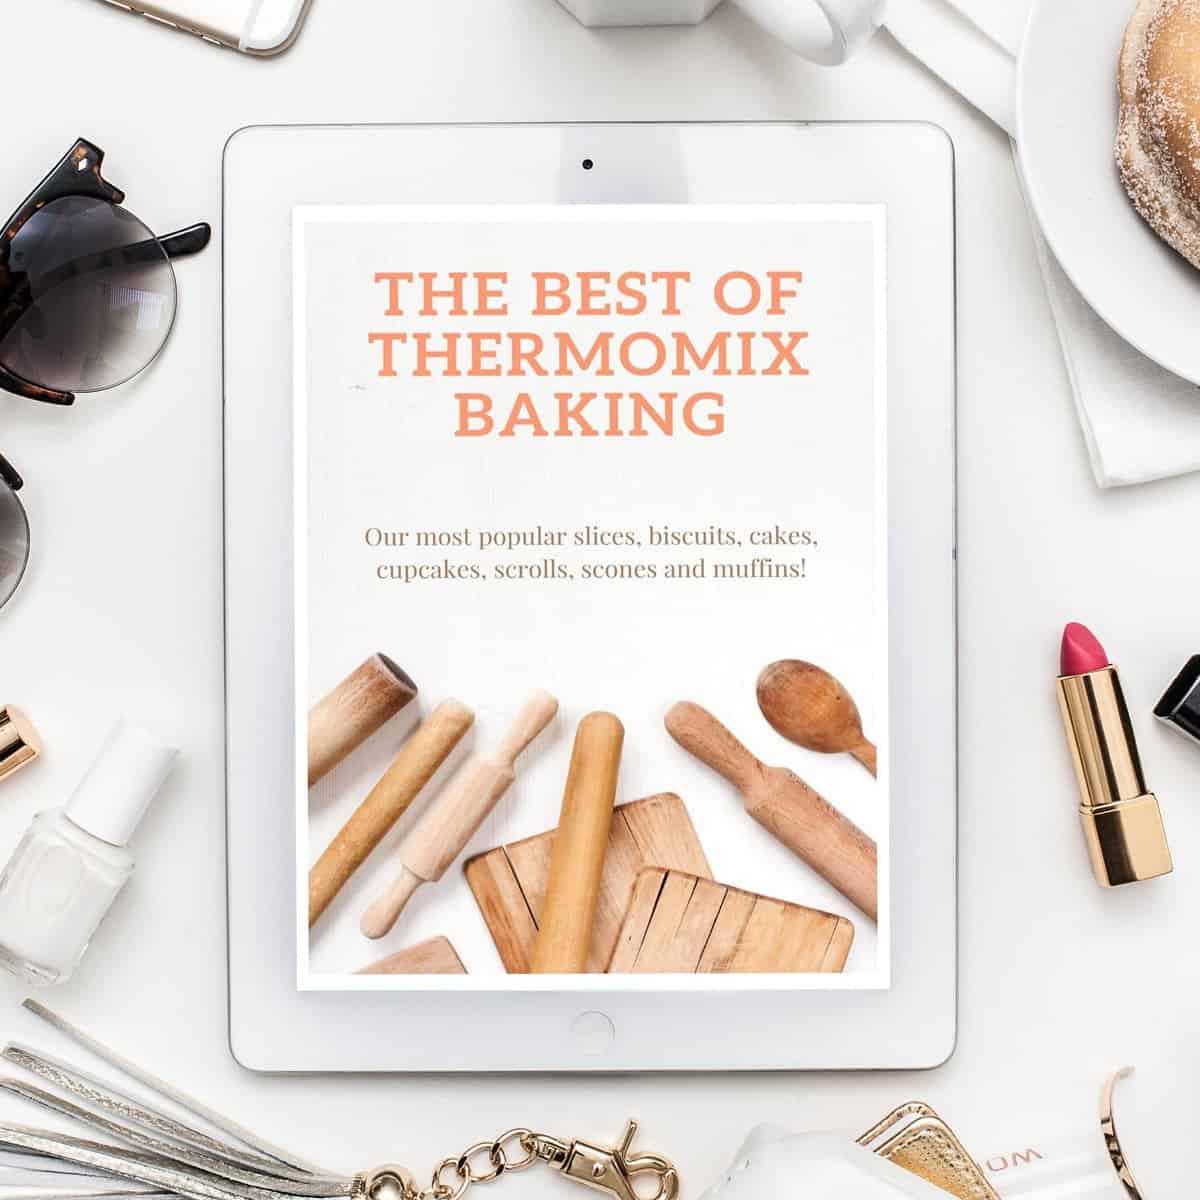 The Best Of Thermomix Baking - Slices, Biscuits, Cakes, Muffins, Scrolls & More